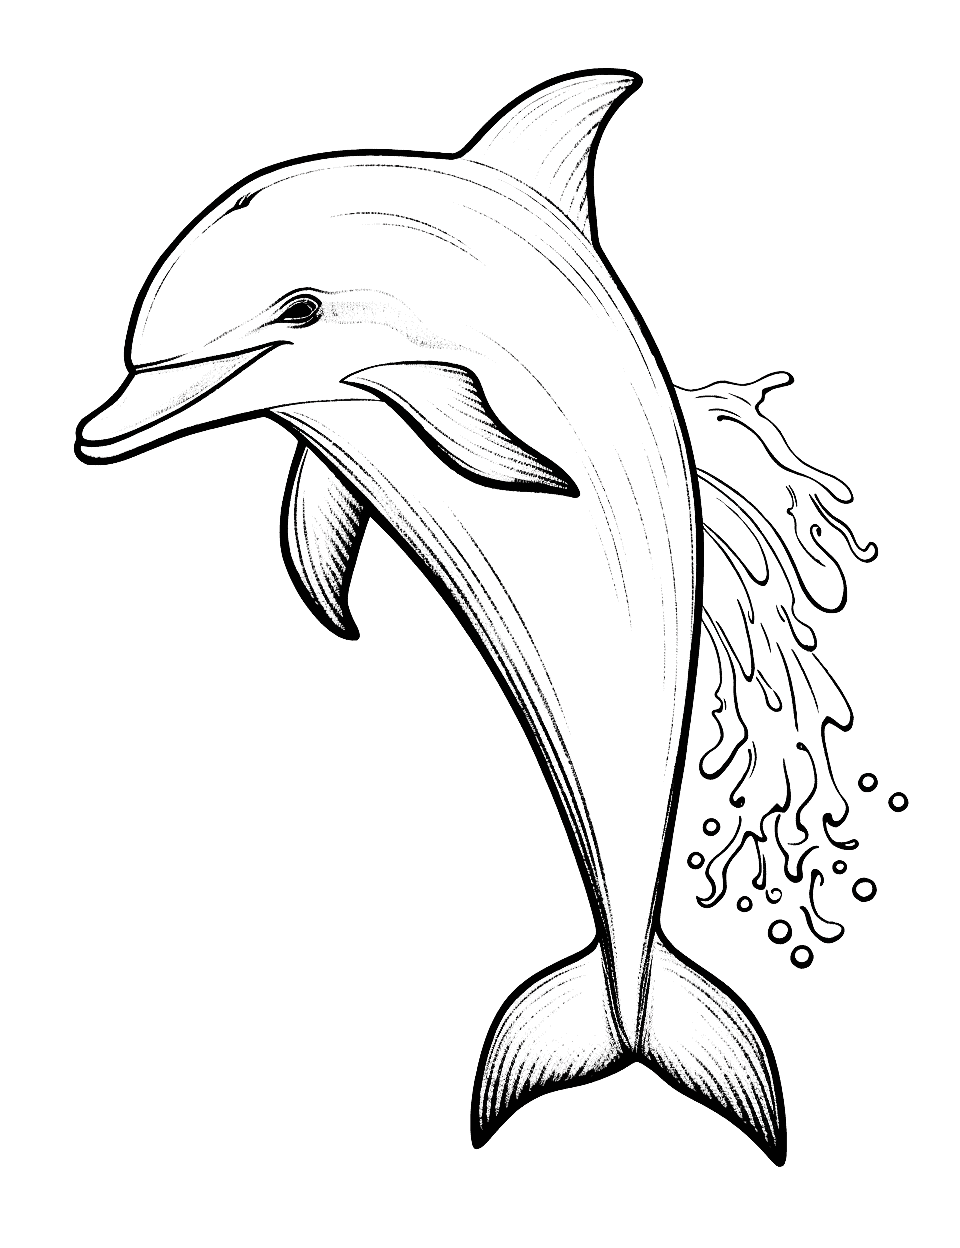 Dancing Dolphin Animal Coloring Page - A dolphin leaping out of the water in a graceful dance.